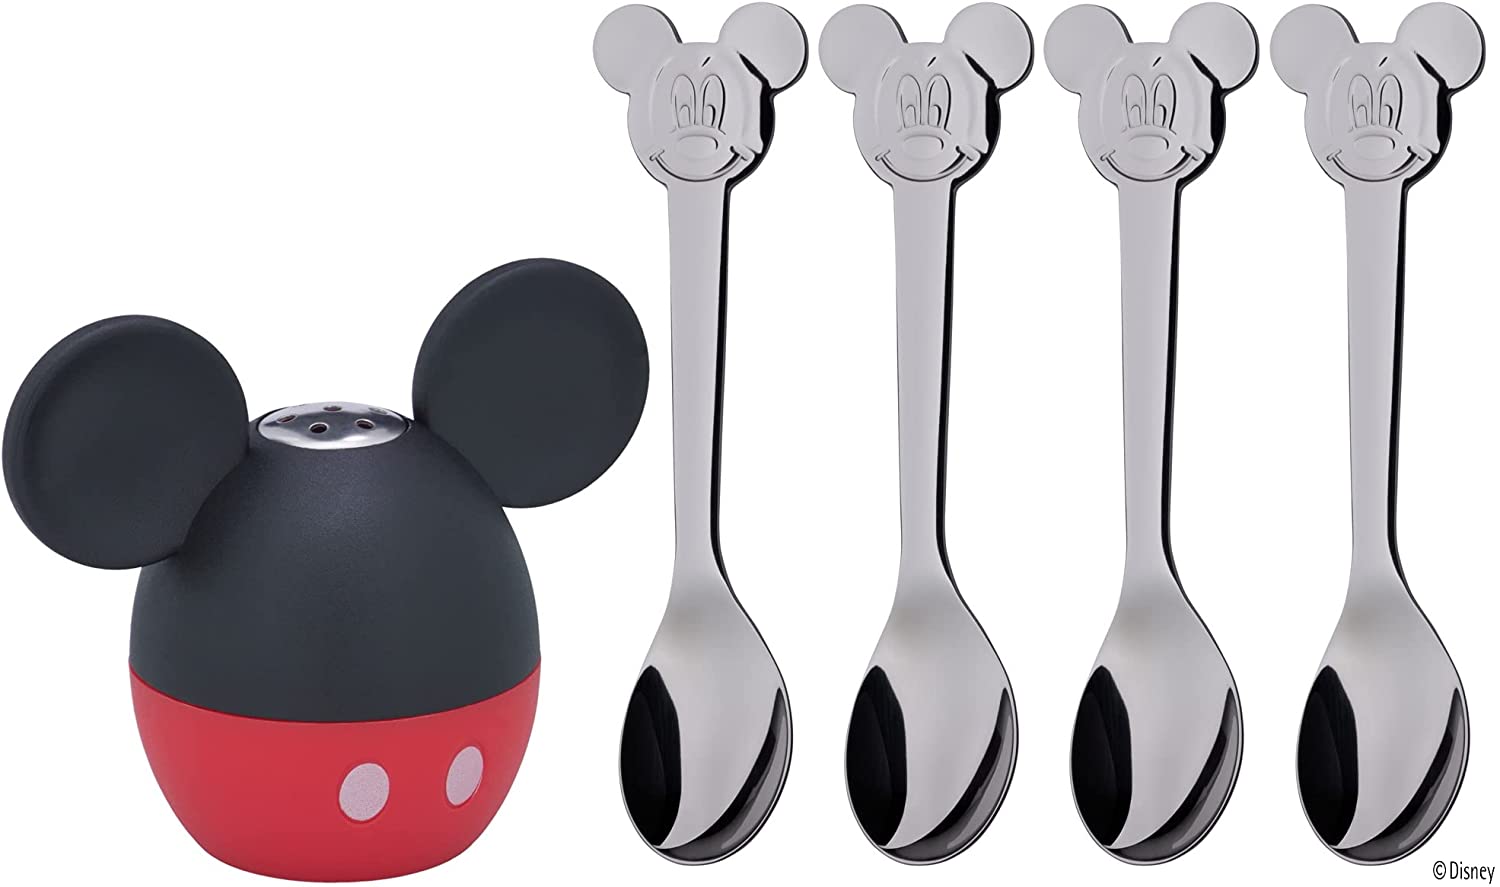 WMF Disney Mickey Mouse Shaker Set 5 Pieces Salt Shaker with 4 Spoons Polished Cromargan Stainless Steel Dishwasher Safe